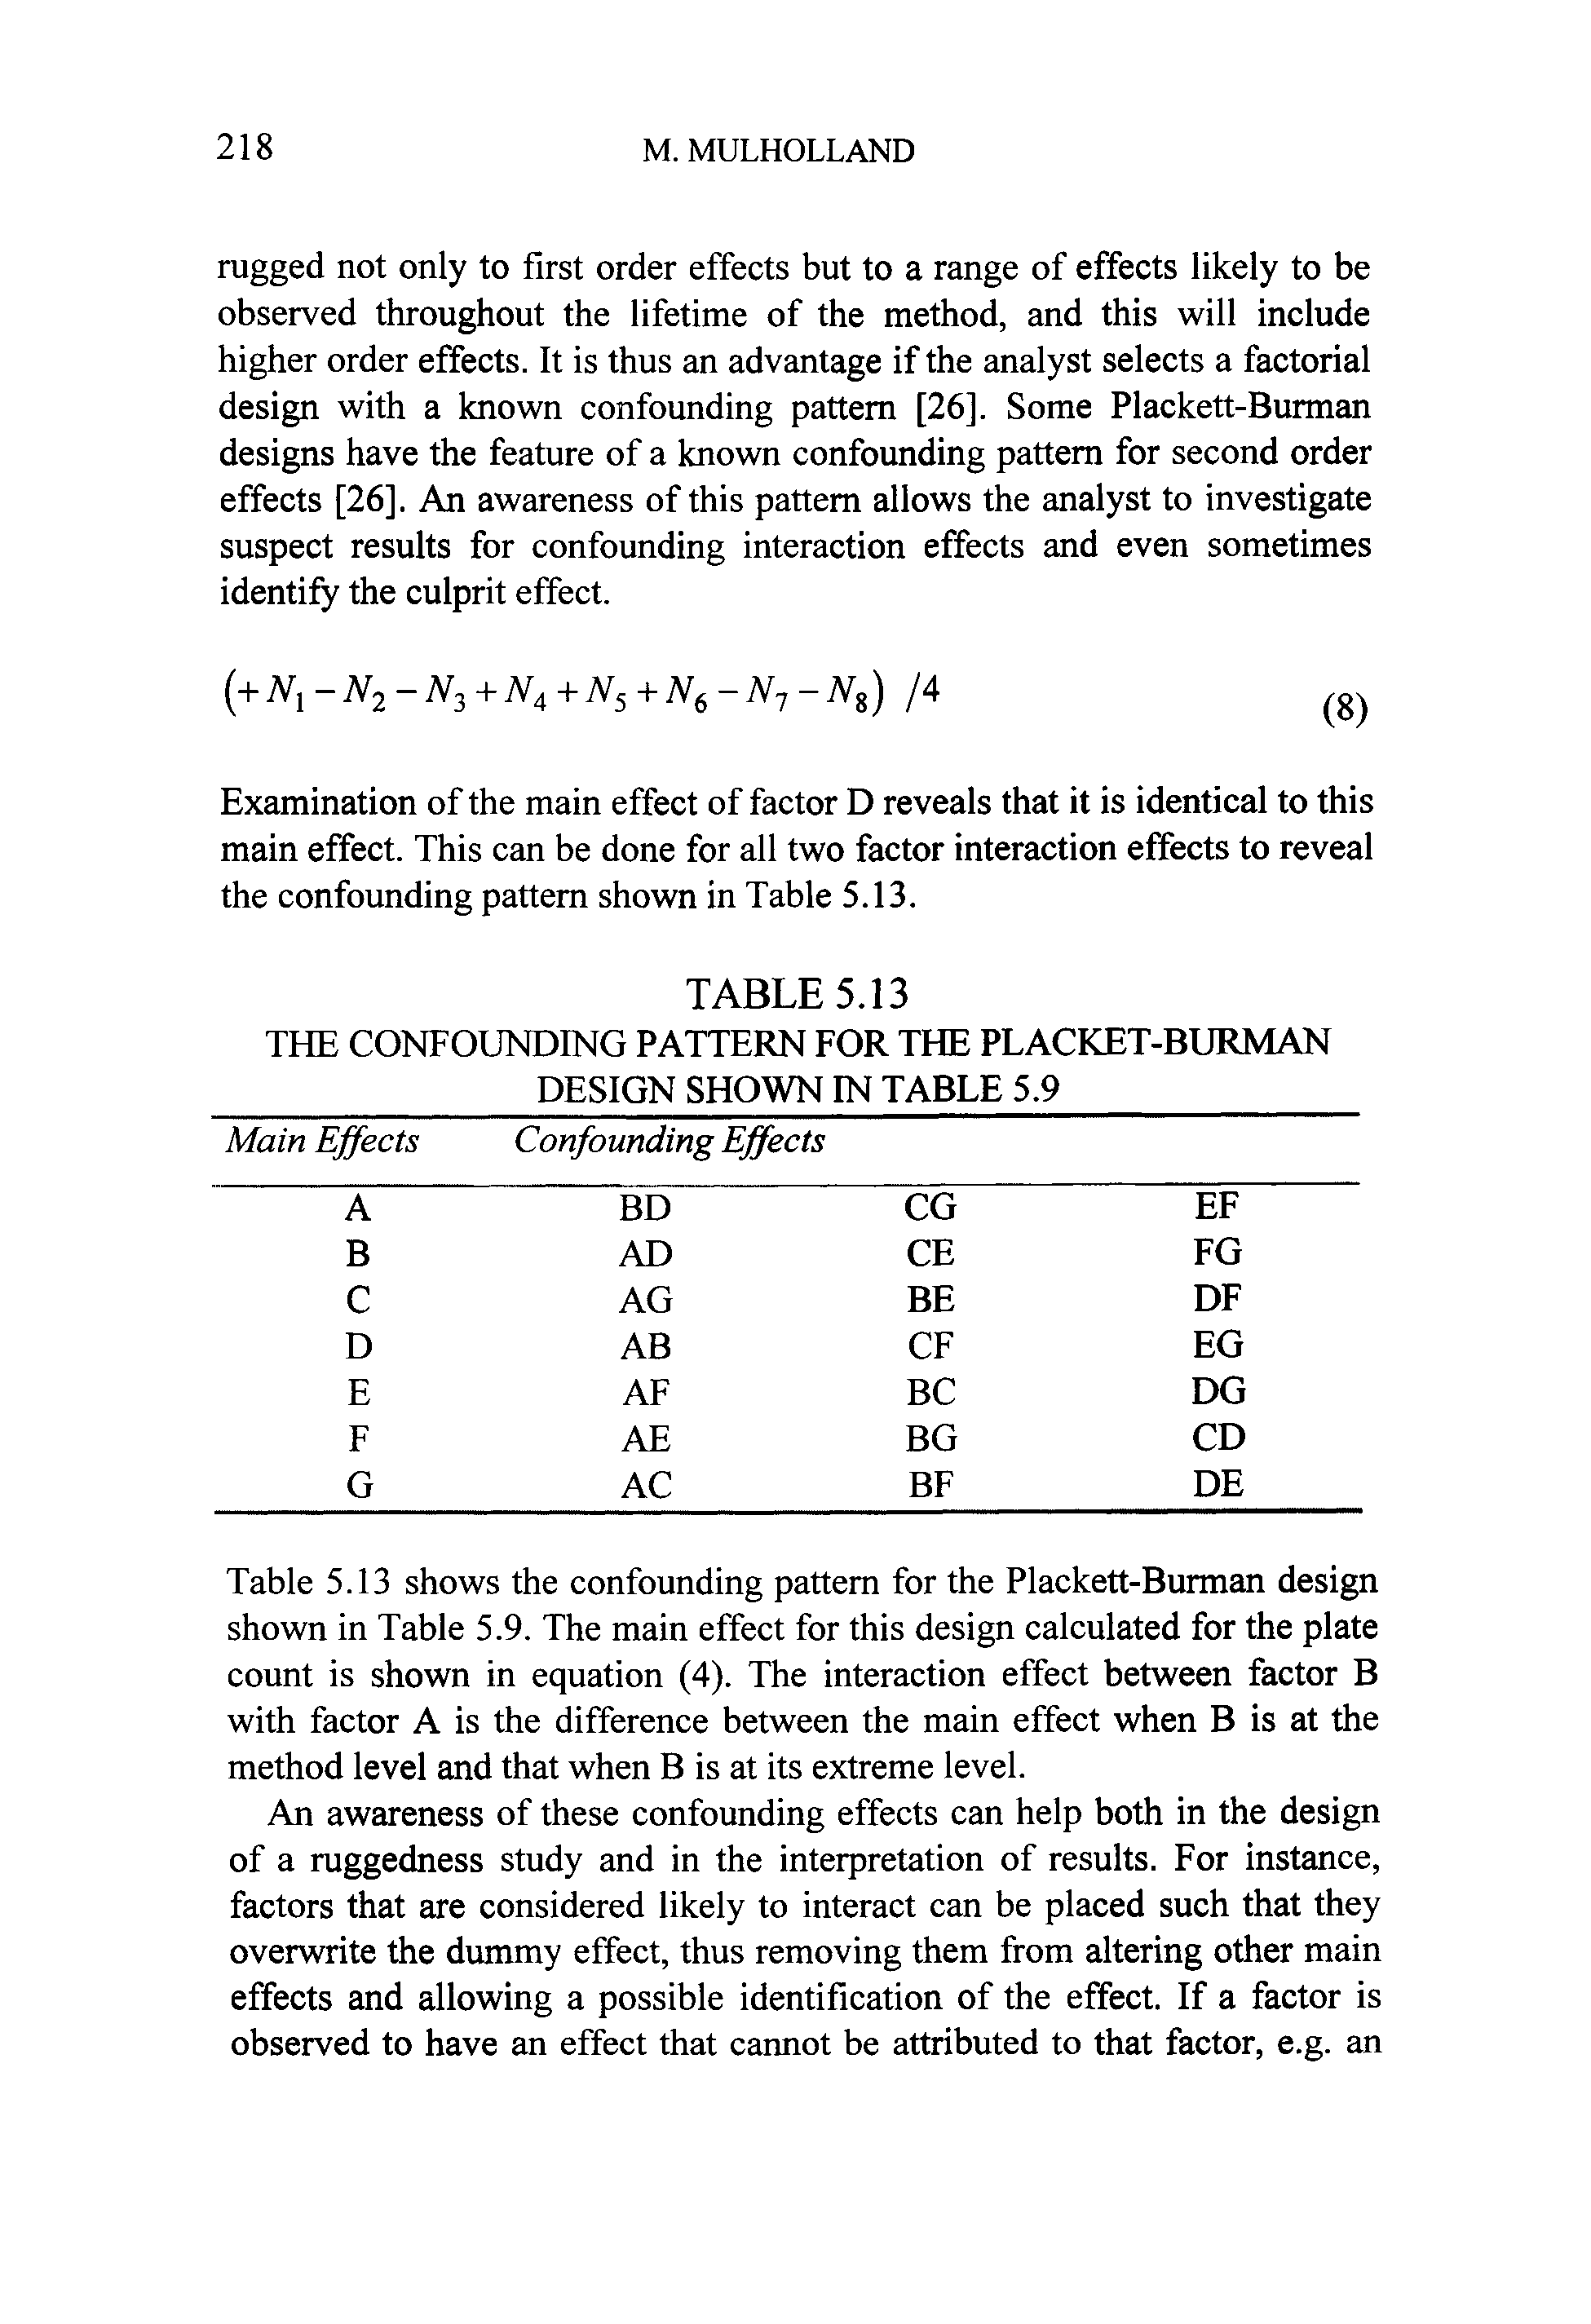 Table 5.13 shows the confounding pattern for the Plackett-Burman design shown in Table 5.9. The main effect for this design calculated for the plate count is shown in equation (4). The interaction effect between factor B with factor A is the difference between the main effect when B is at the method level and that when B is at its extreme level.